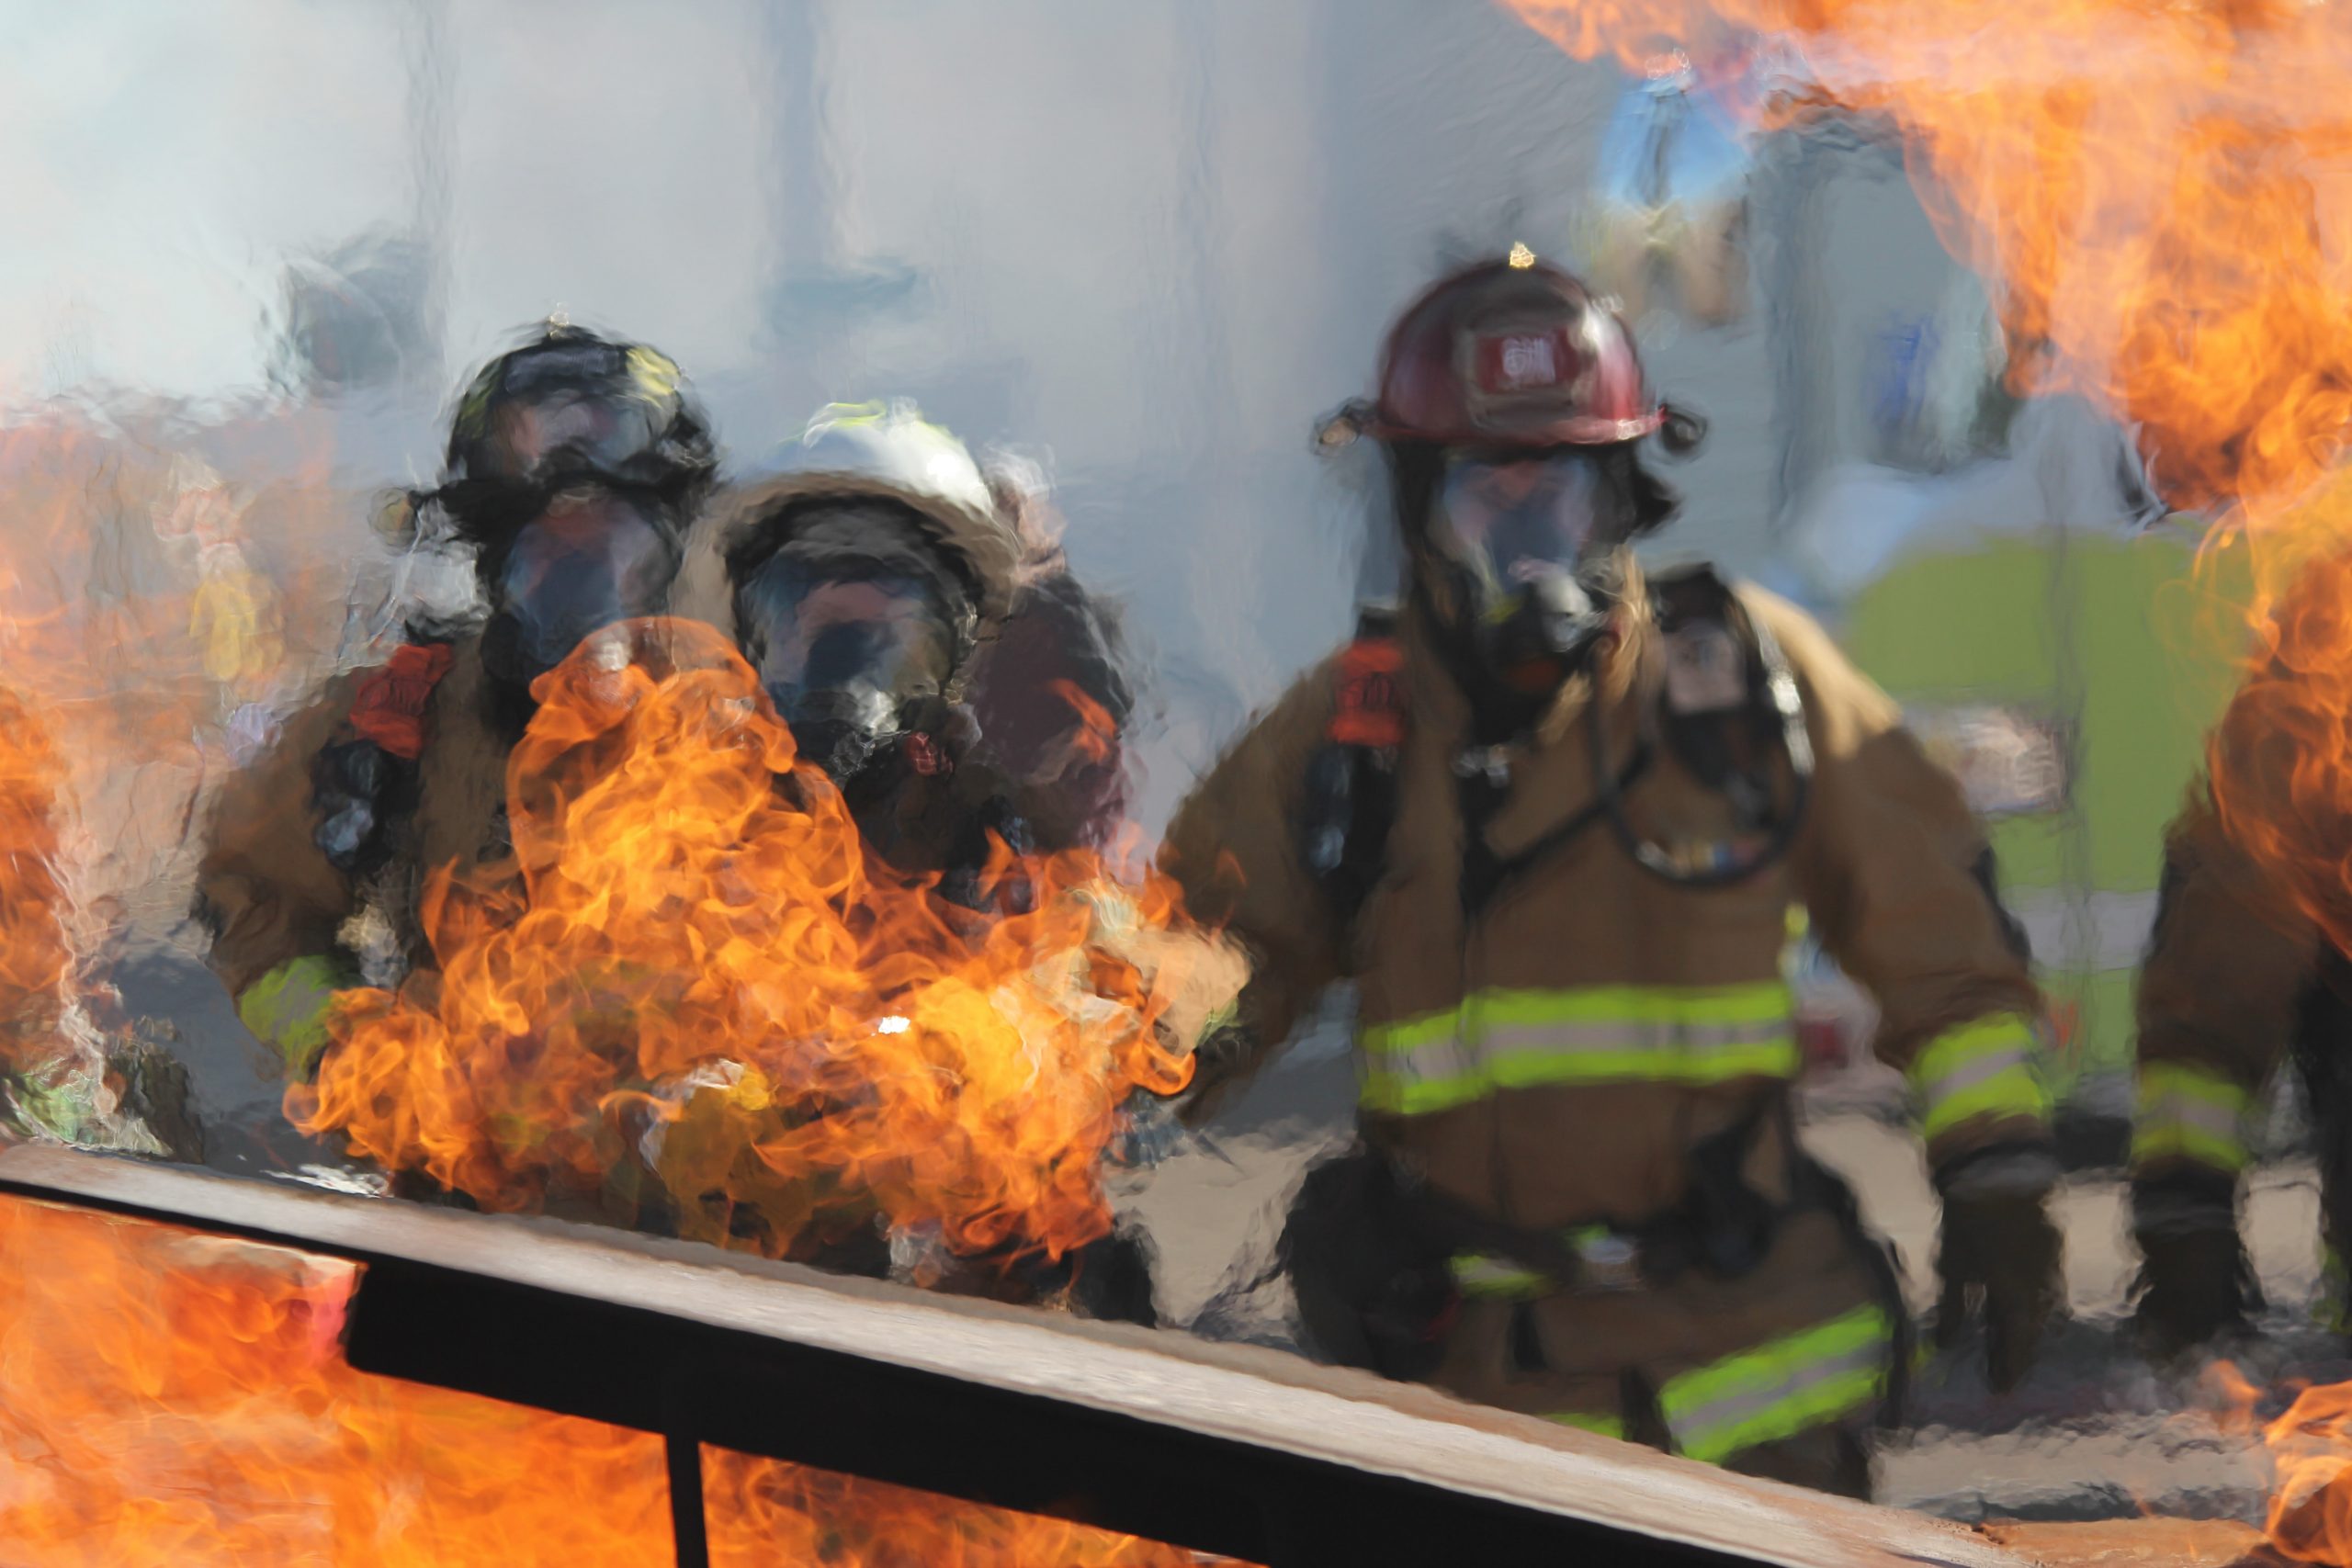 an image of fire fighters, tackling a blaze